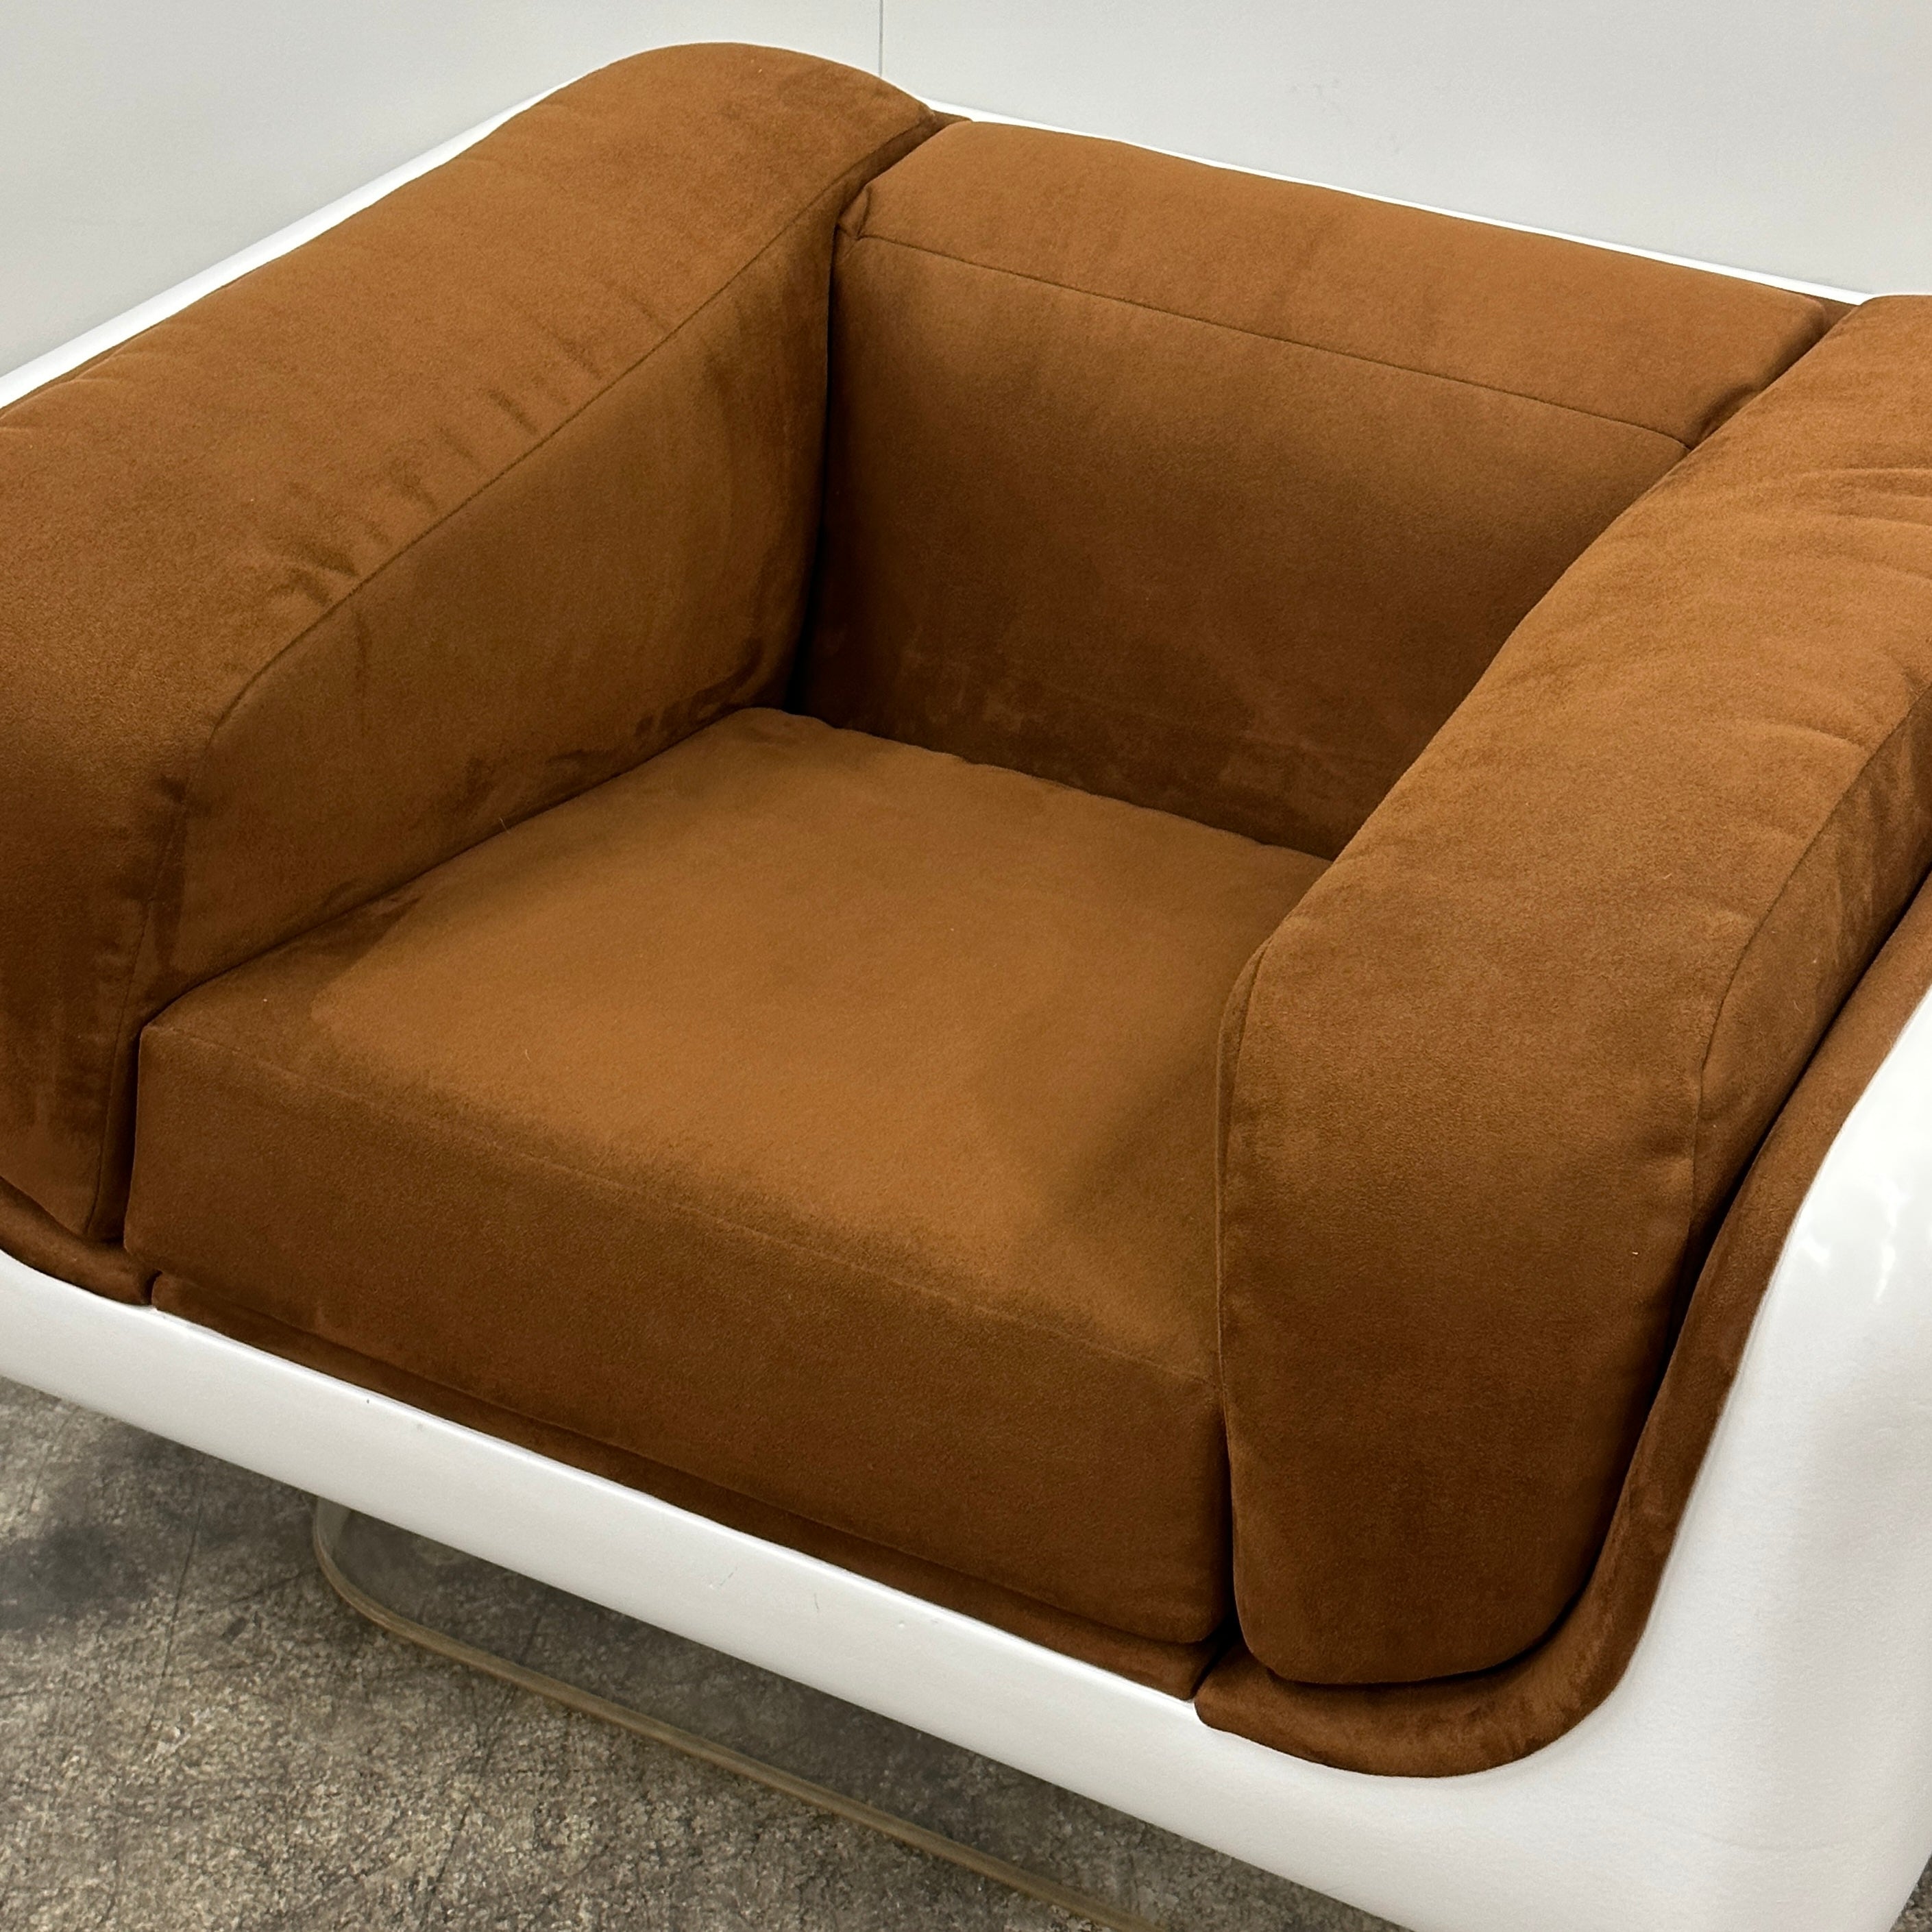 Soft Seating Lounge Chair by William Andrus for Steelcase